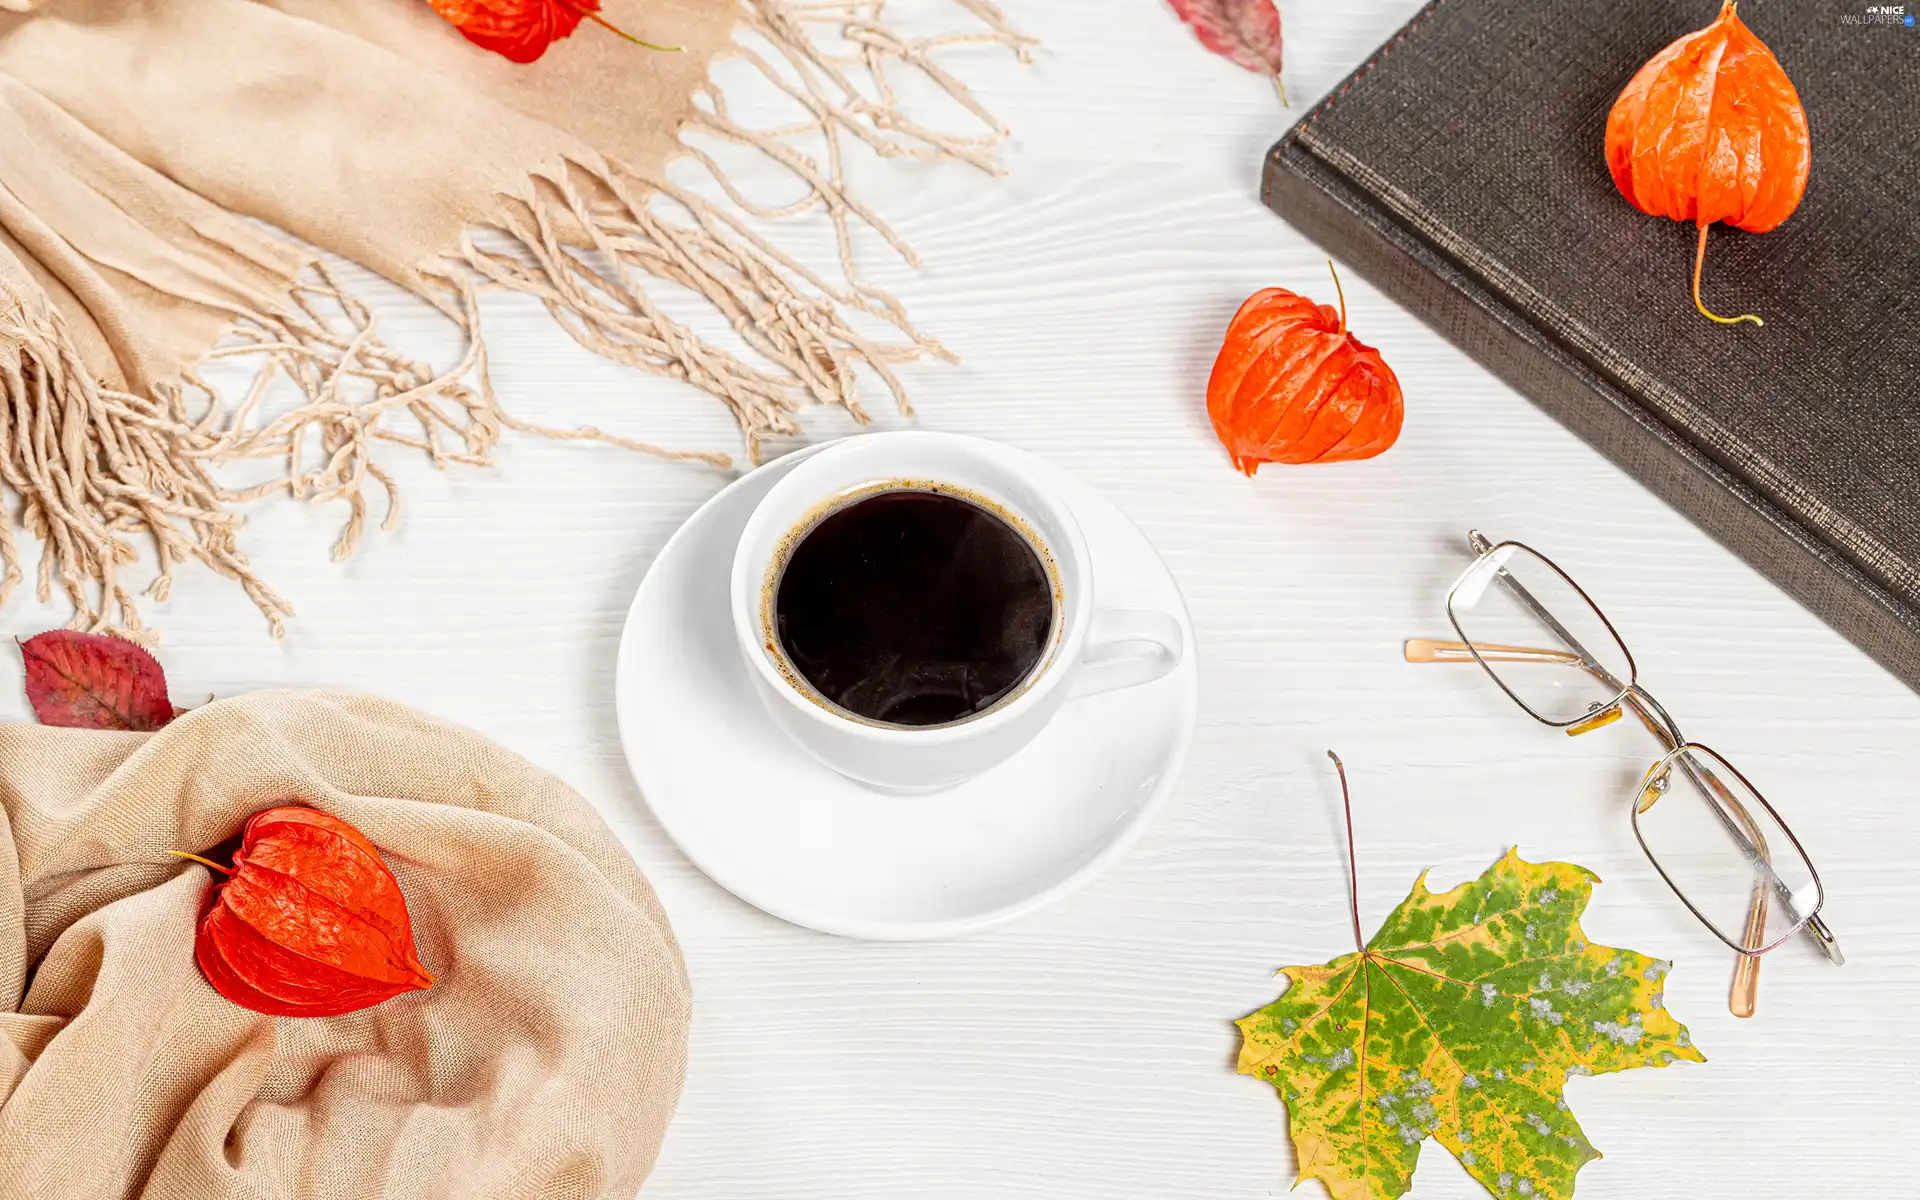 Tomatillo, cup, composition, coffee, Glasses, Leaf, Scarf, Book